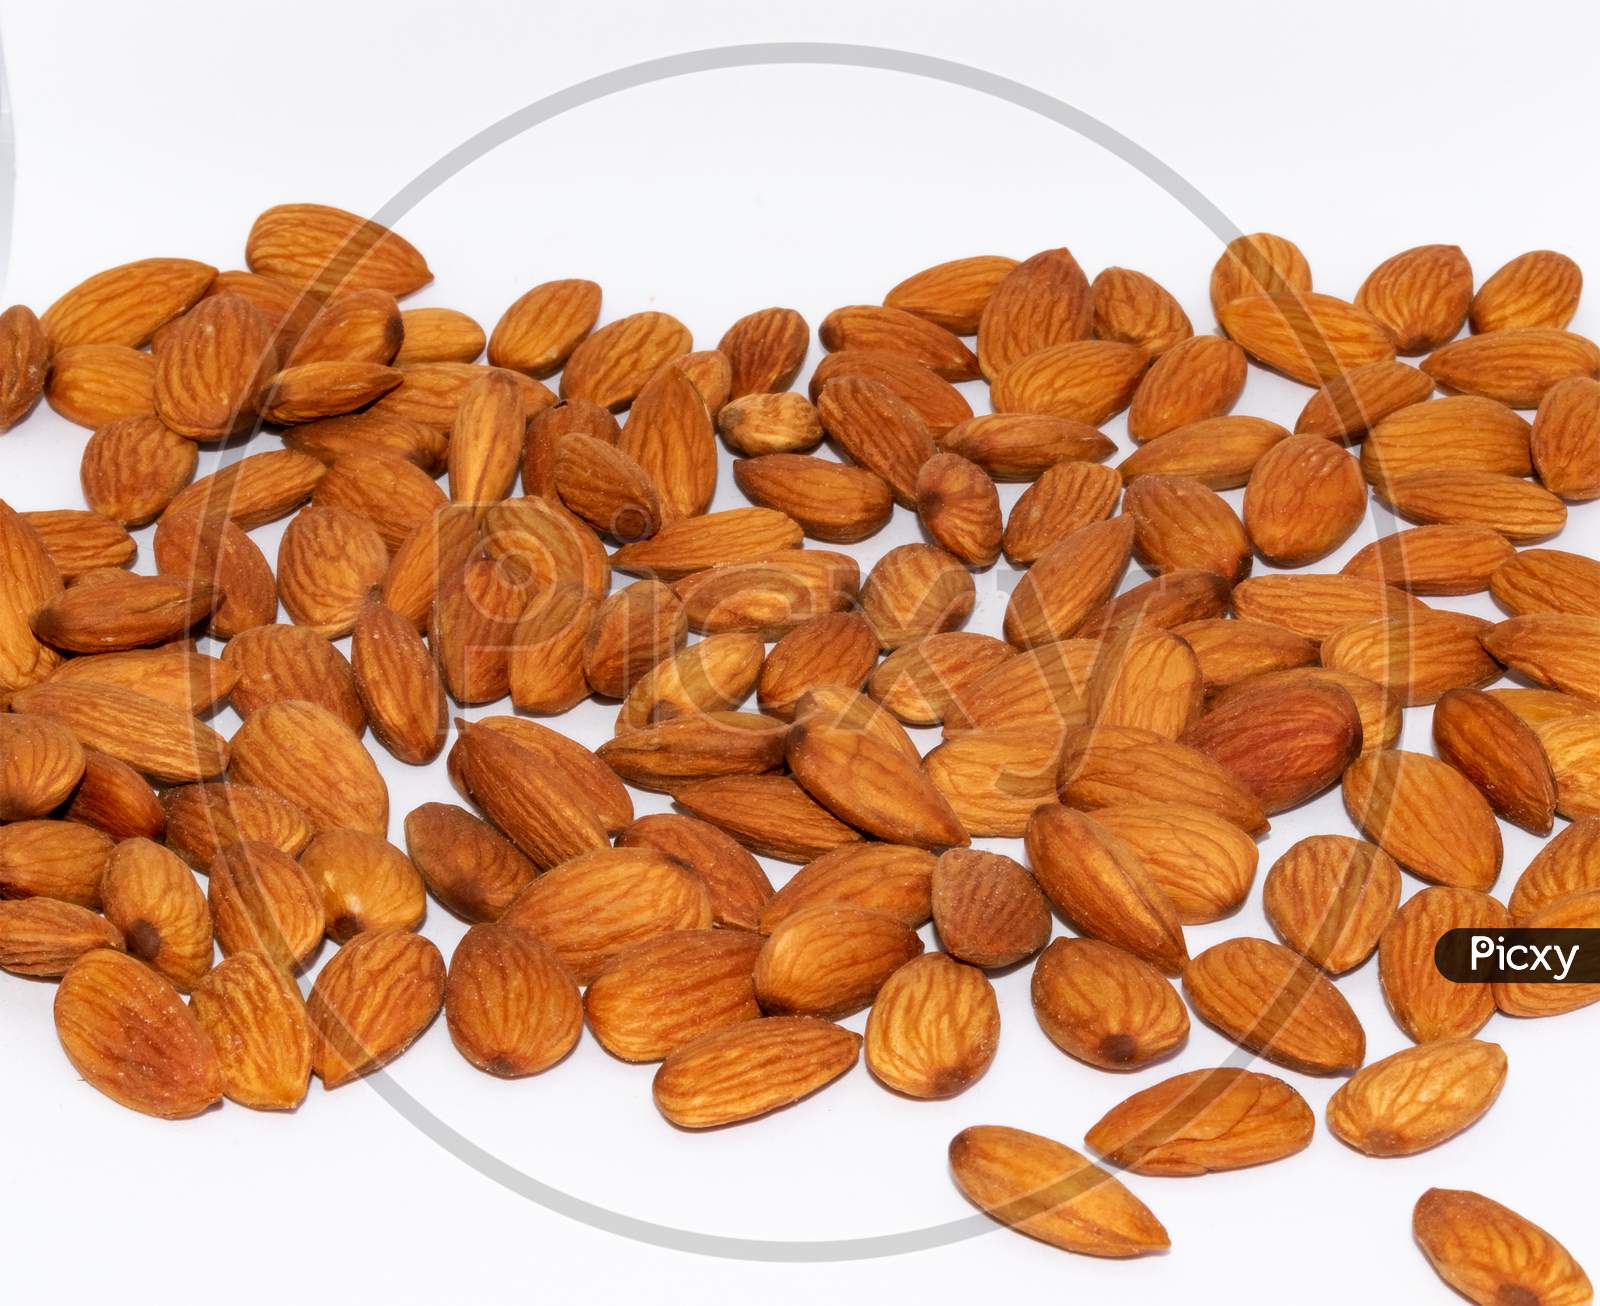 Group of fresh almond nuts backgroung